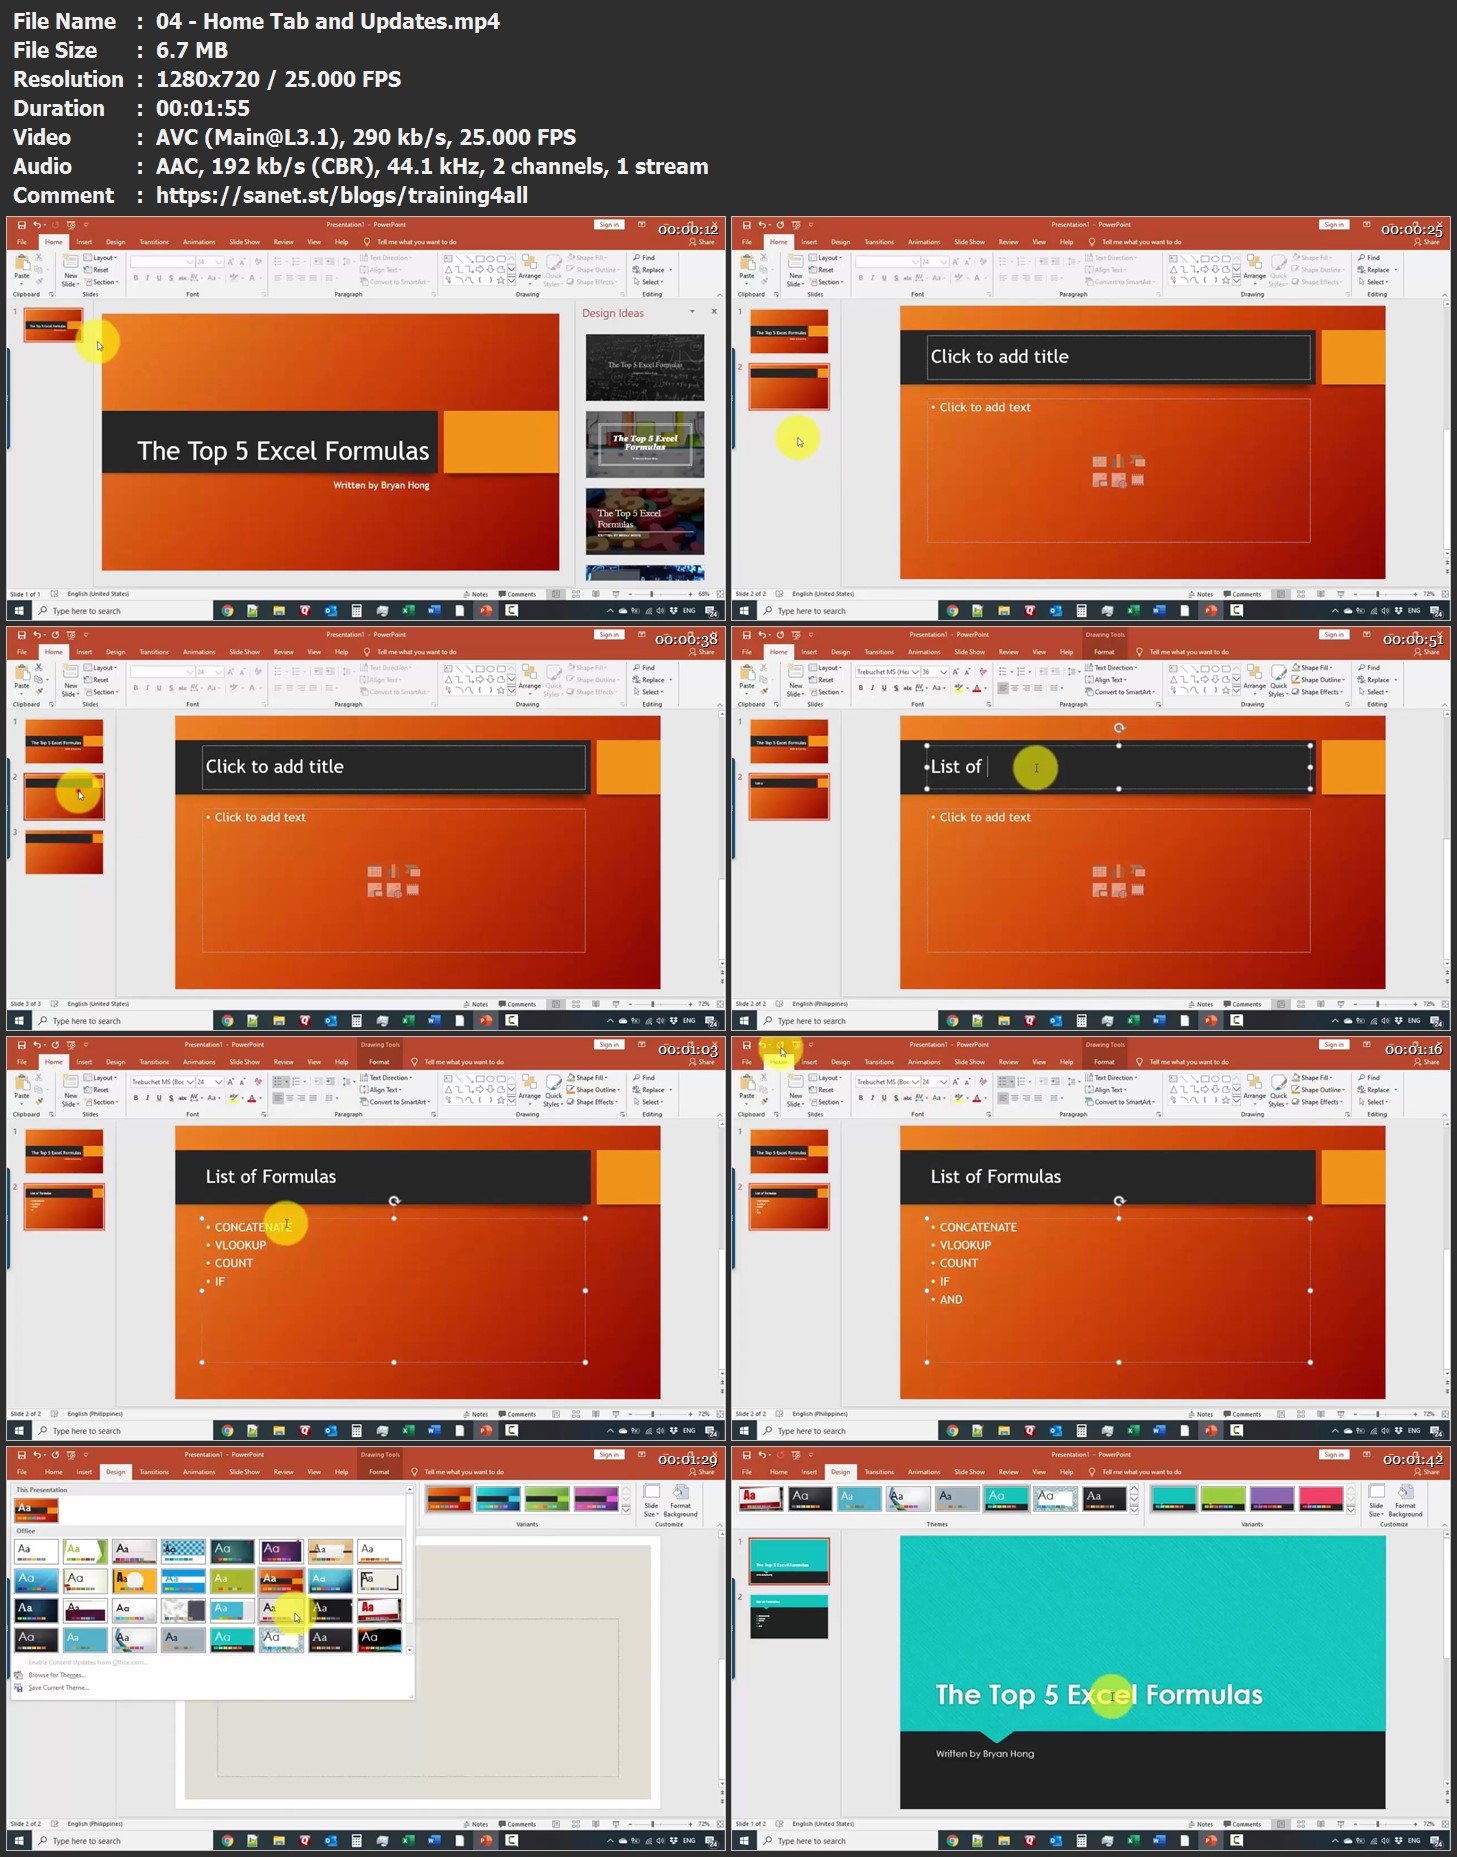 download powerpoint 2019 for windows 7